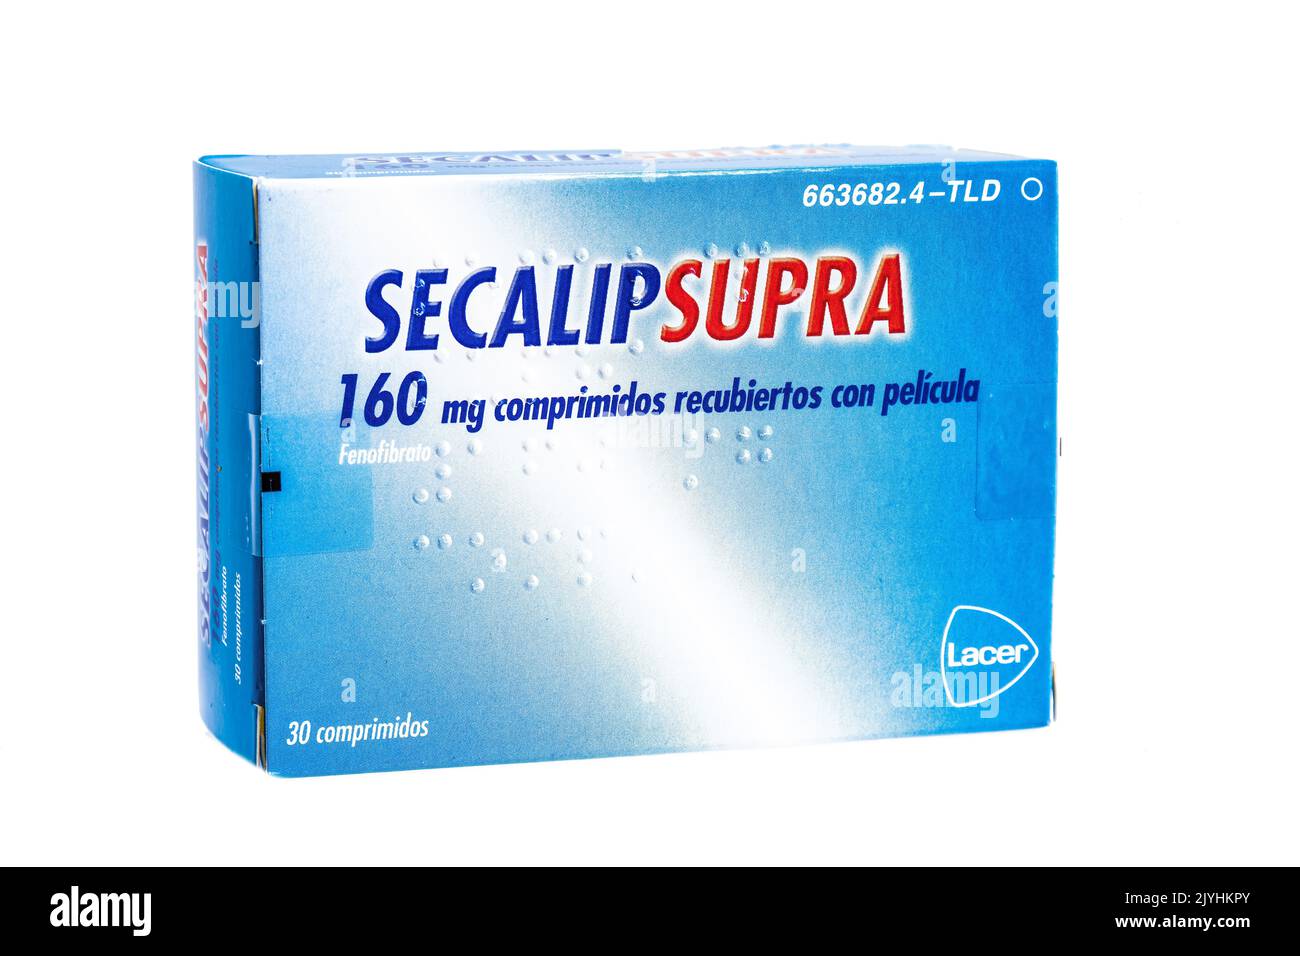 Huelva, Spain - September 8, 2022: Fenofibrate brand Secalip Supra, is a medication of the fibrate class used to treat abnormal blood lipid levels. Stock Photo